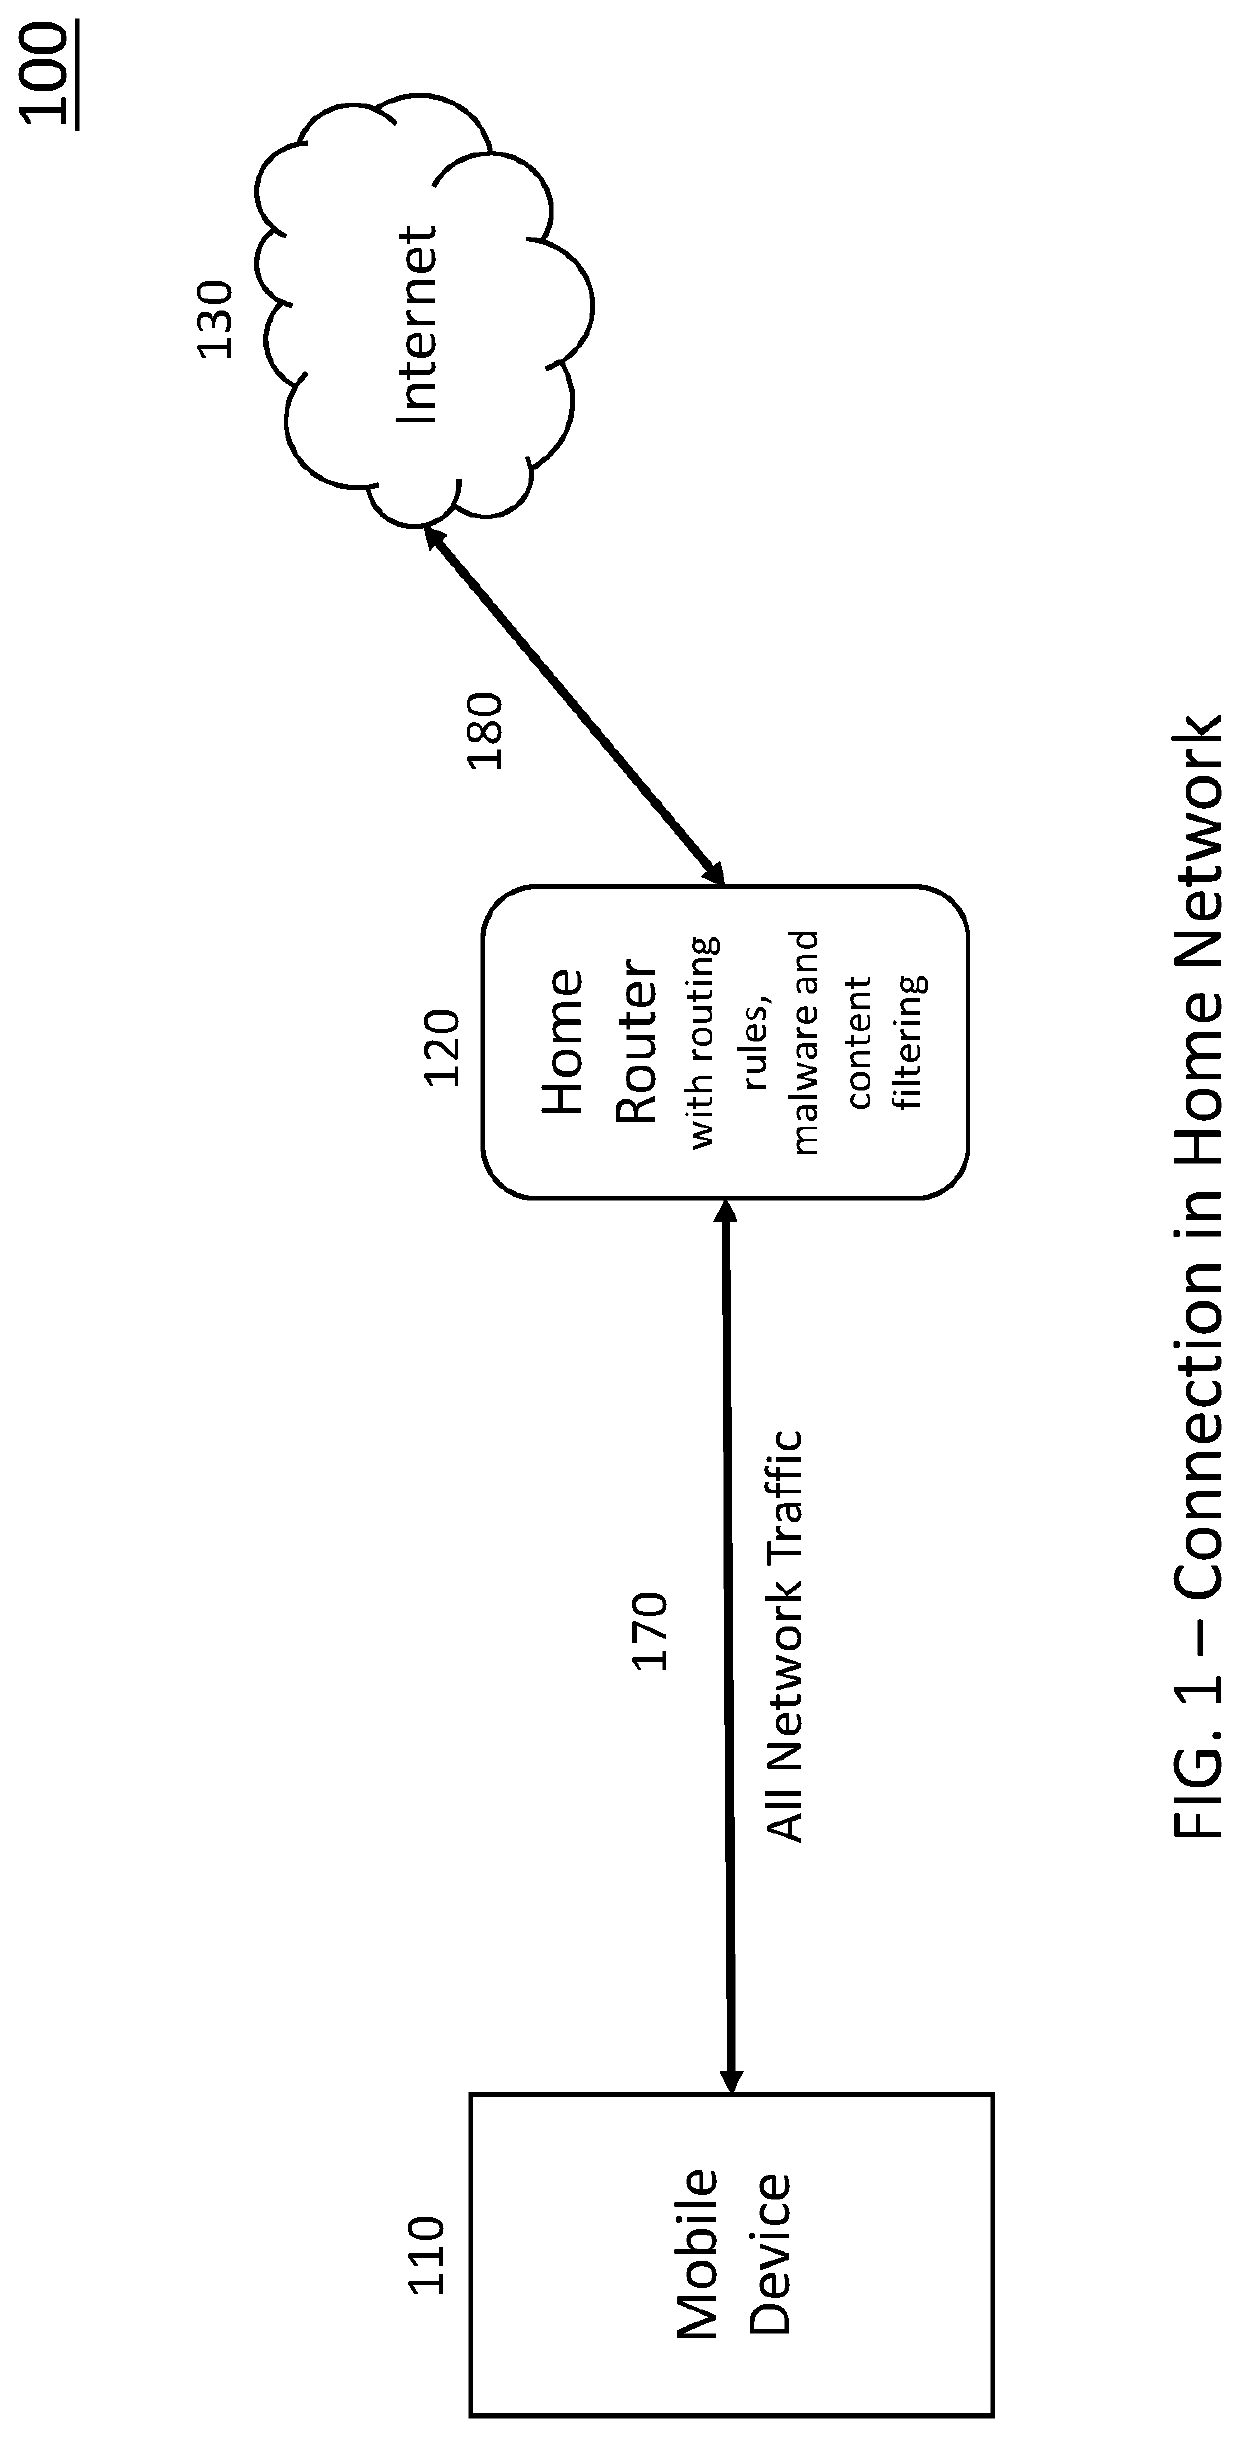 Method of protecting mobile devices from vulnerabilities like malware, enabling content filtering, screen time restrictions and other parental control rules while on public network by forwarding the internet traffic to a smart, secured home router